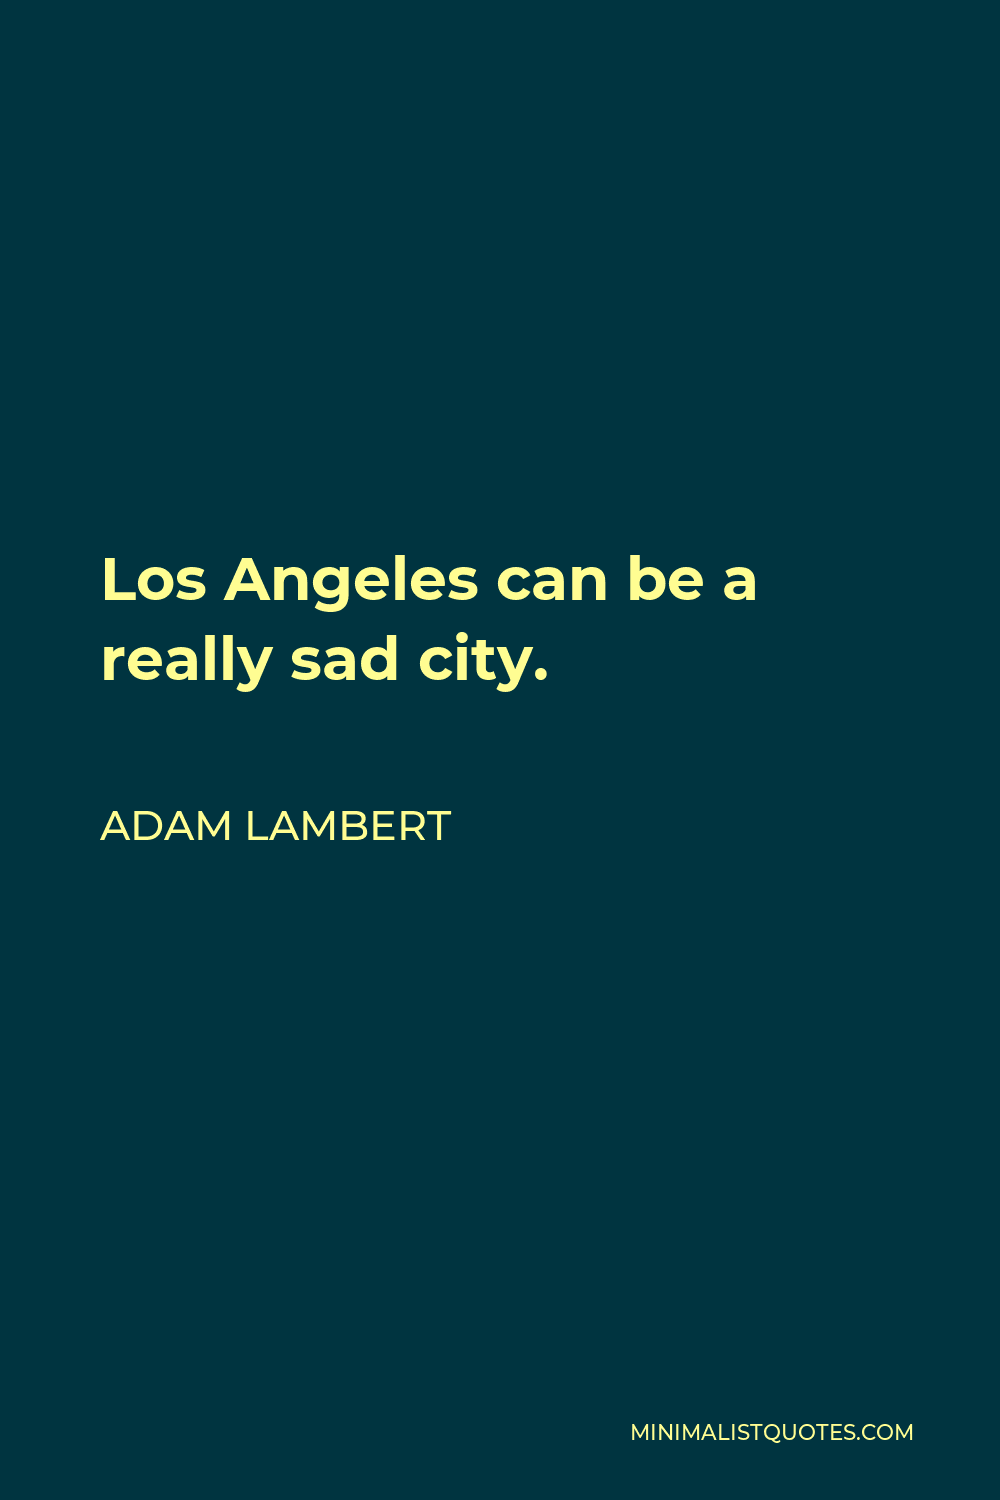 Adam Lambert Quote - Los Angeles can be a really sad city.